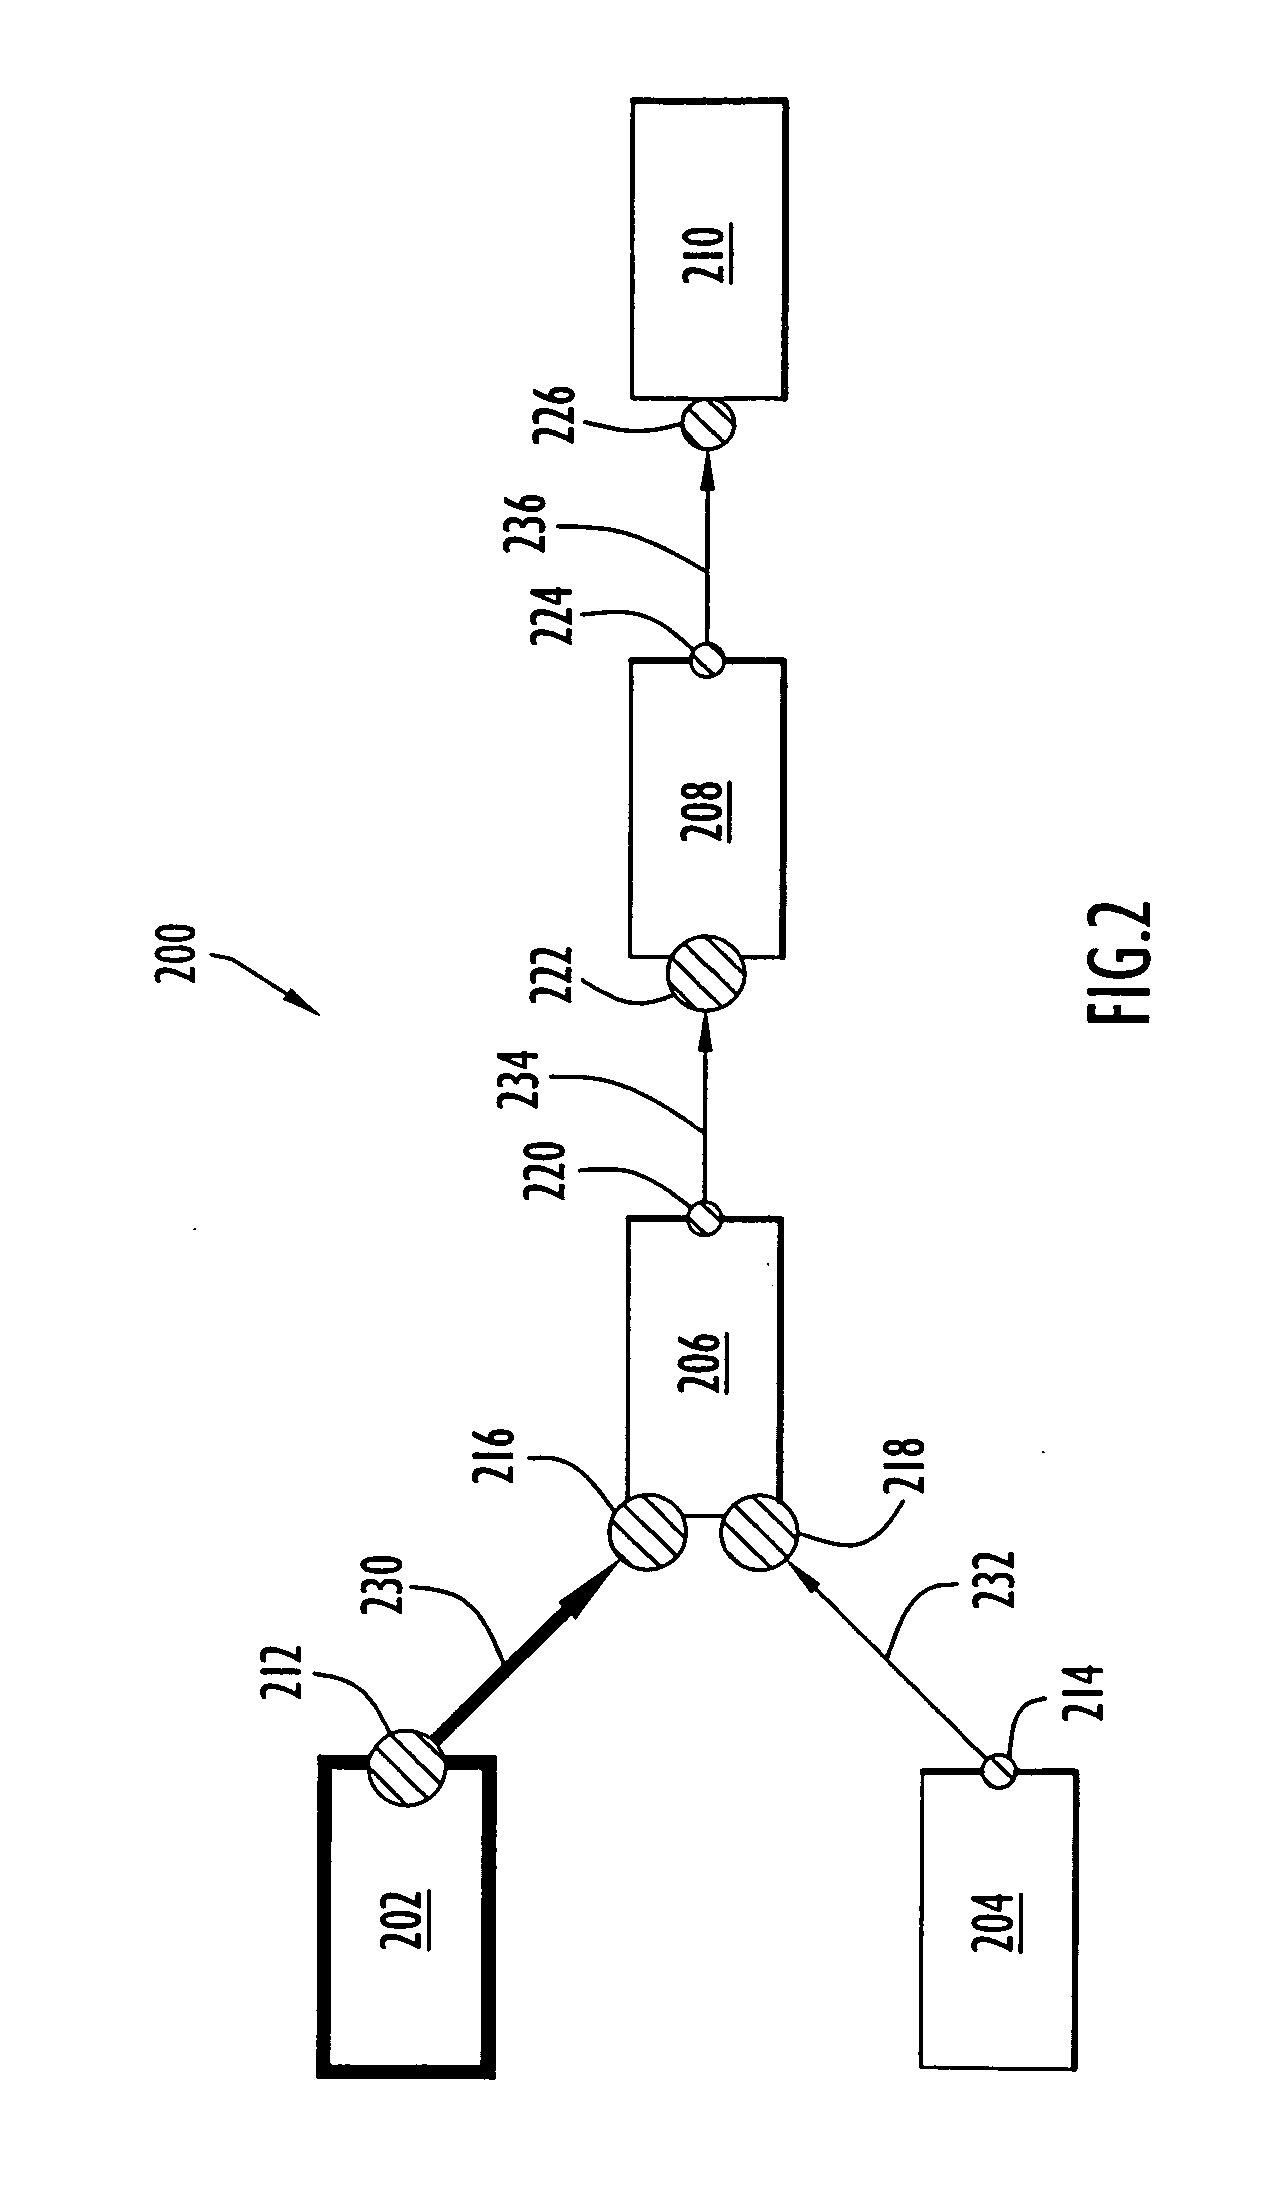 Method and system for displaying performance constraints in a flow design tool